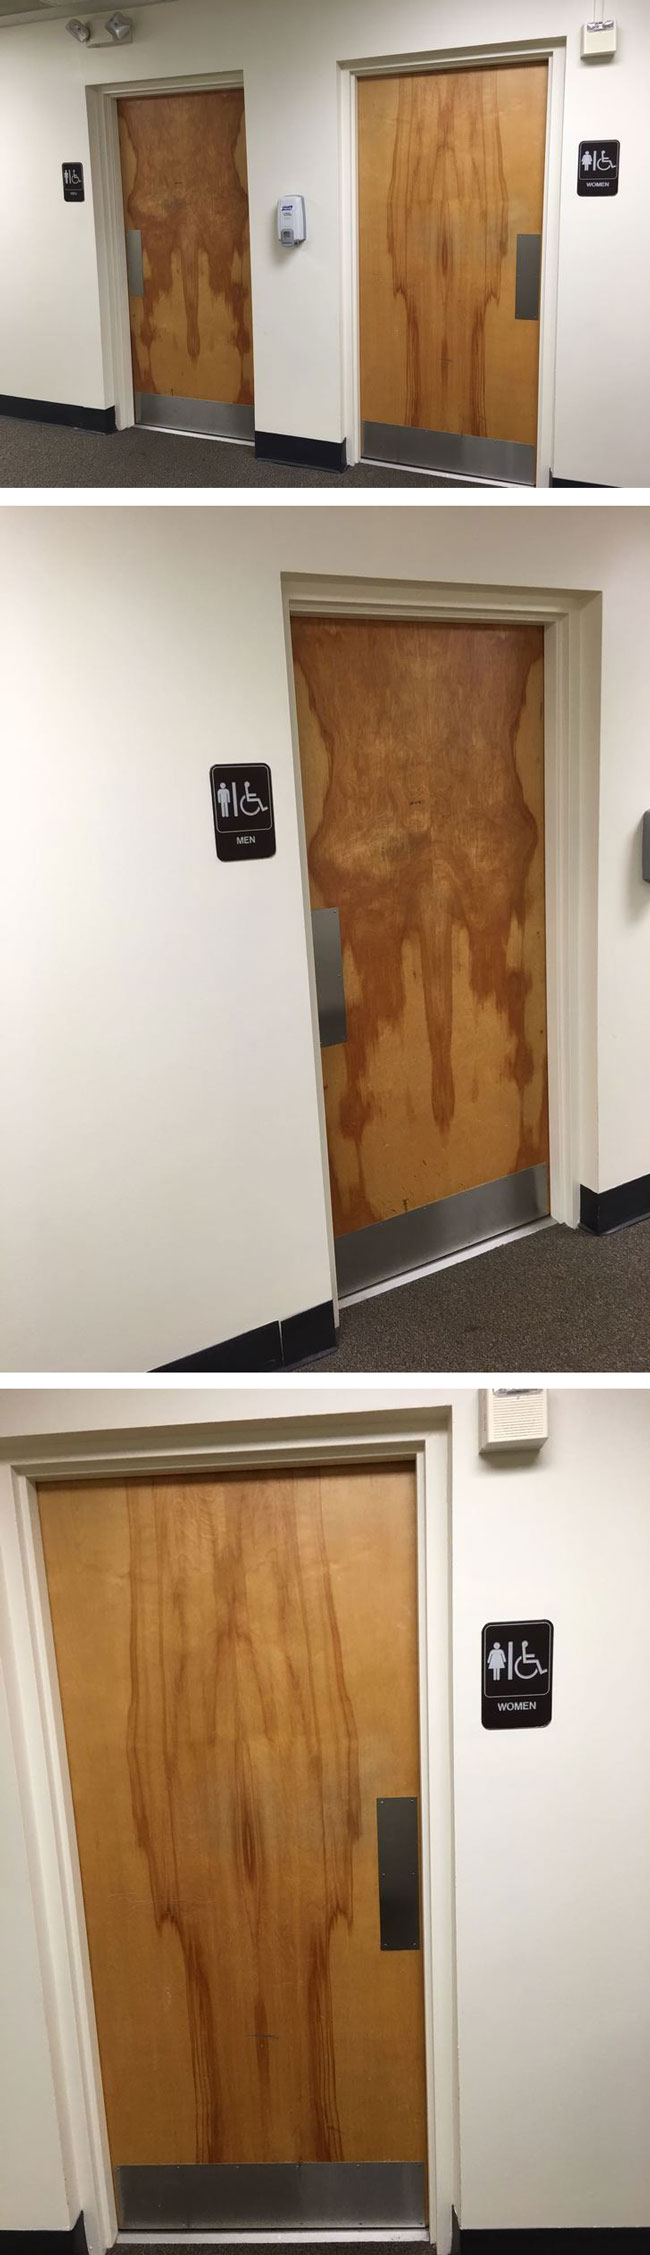 My aunt went to the bathroom in her company's new building. This is what she saw